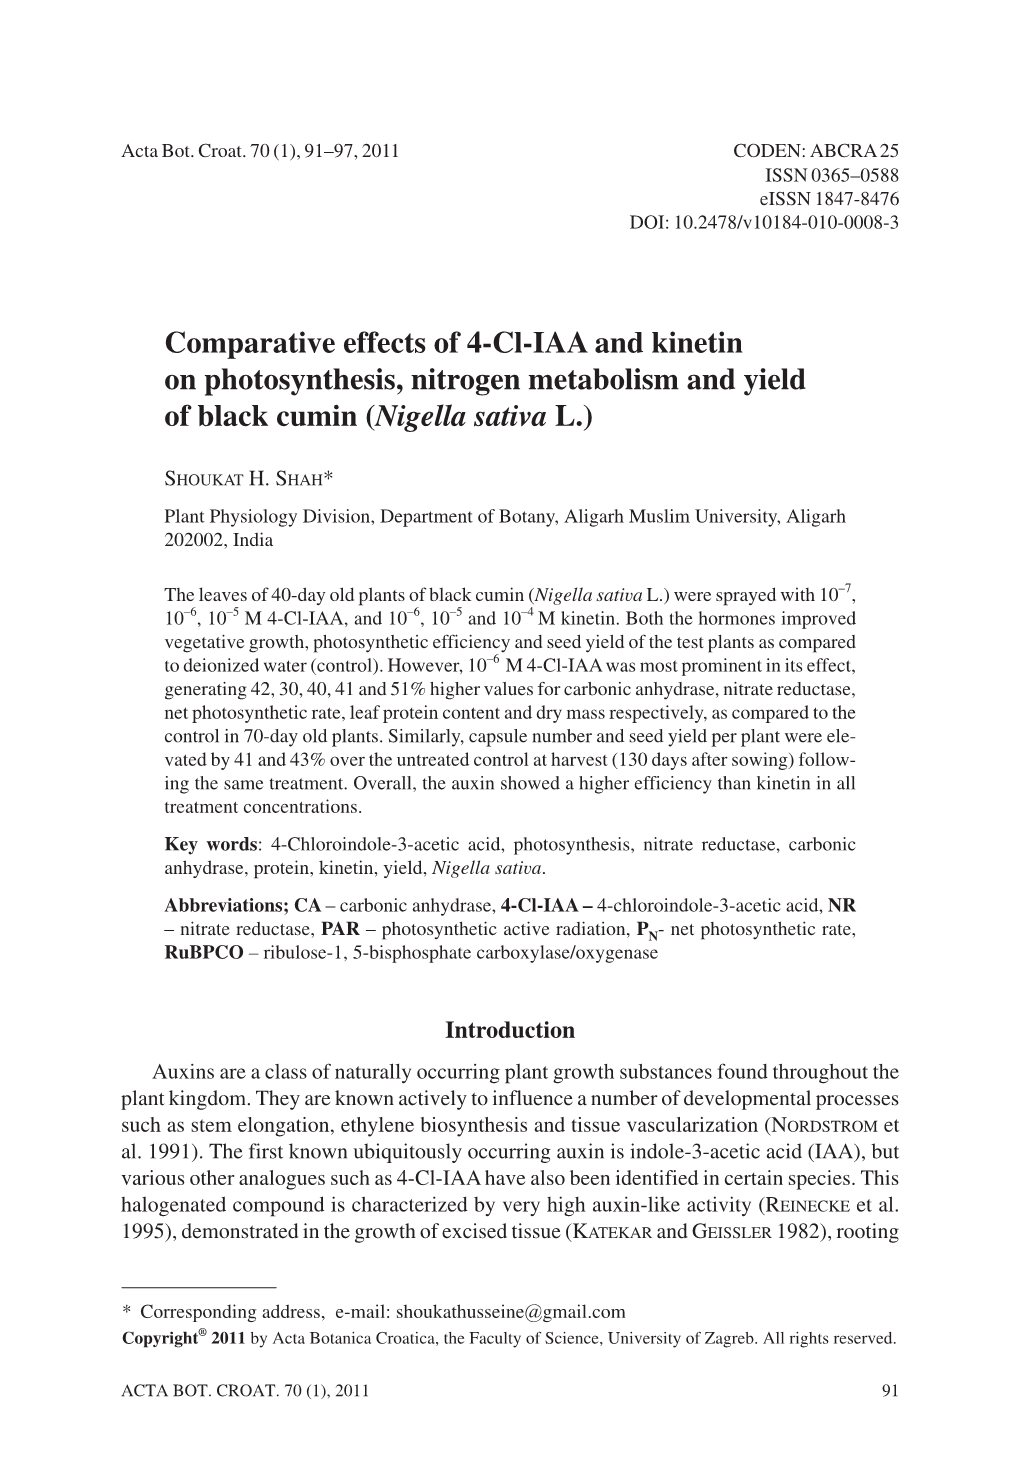 Comparative Effects of 4-Cl-IAA and Kinetin on Photosynthesis, Nitrogen Metabolism and Yield of Black Cumin (Nigella Sativa L.)